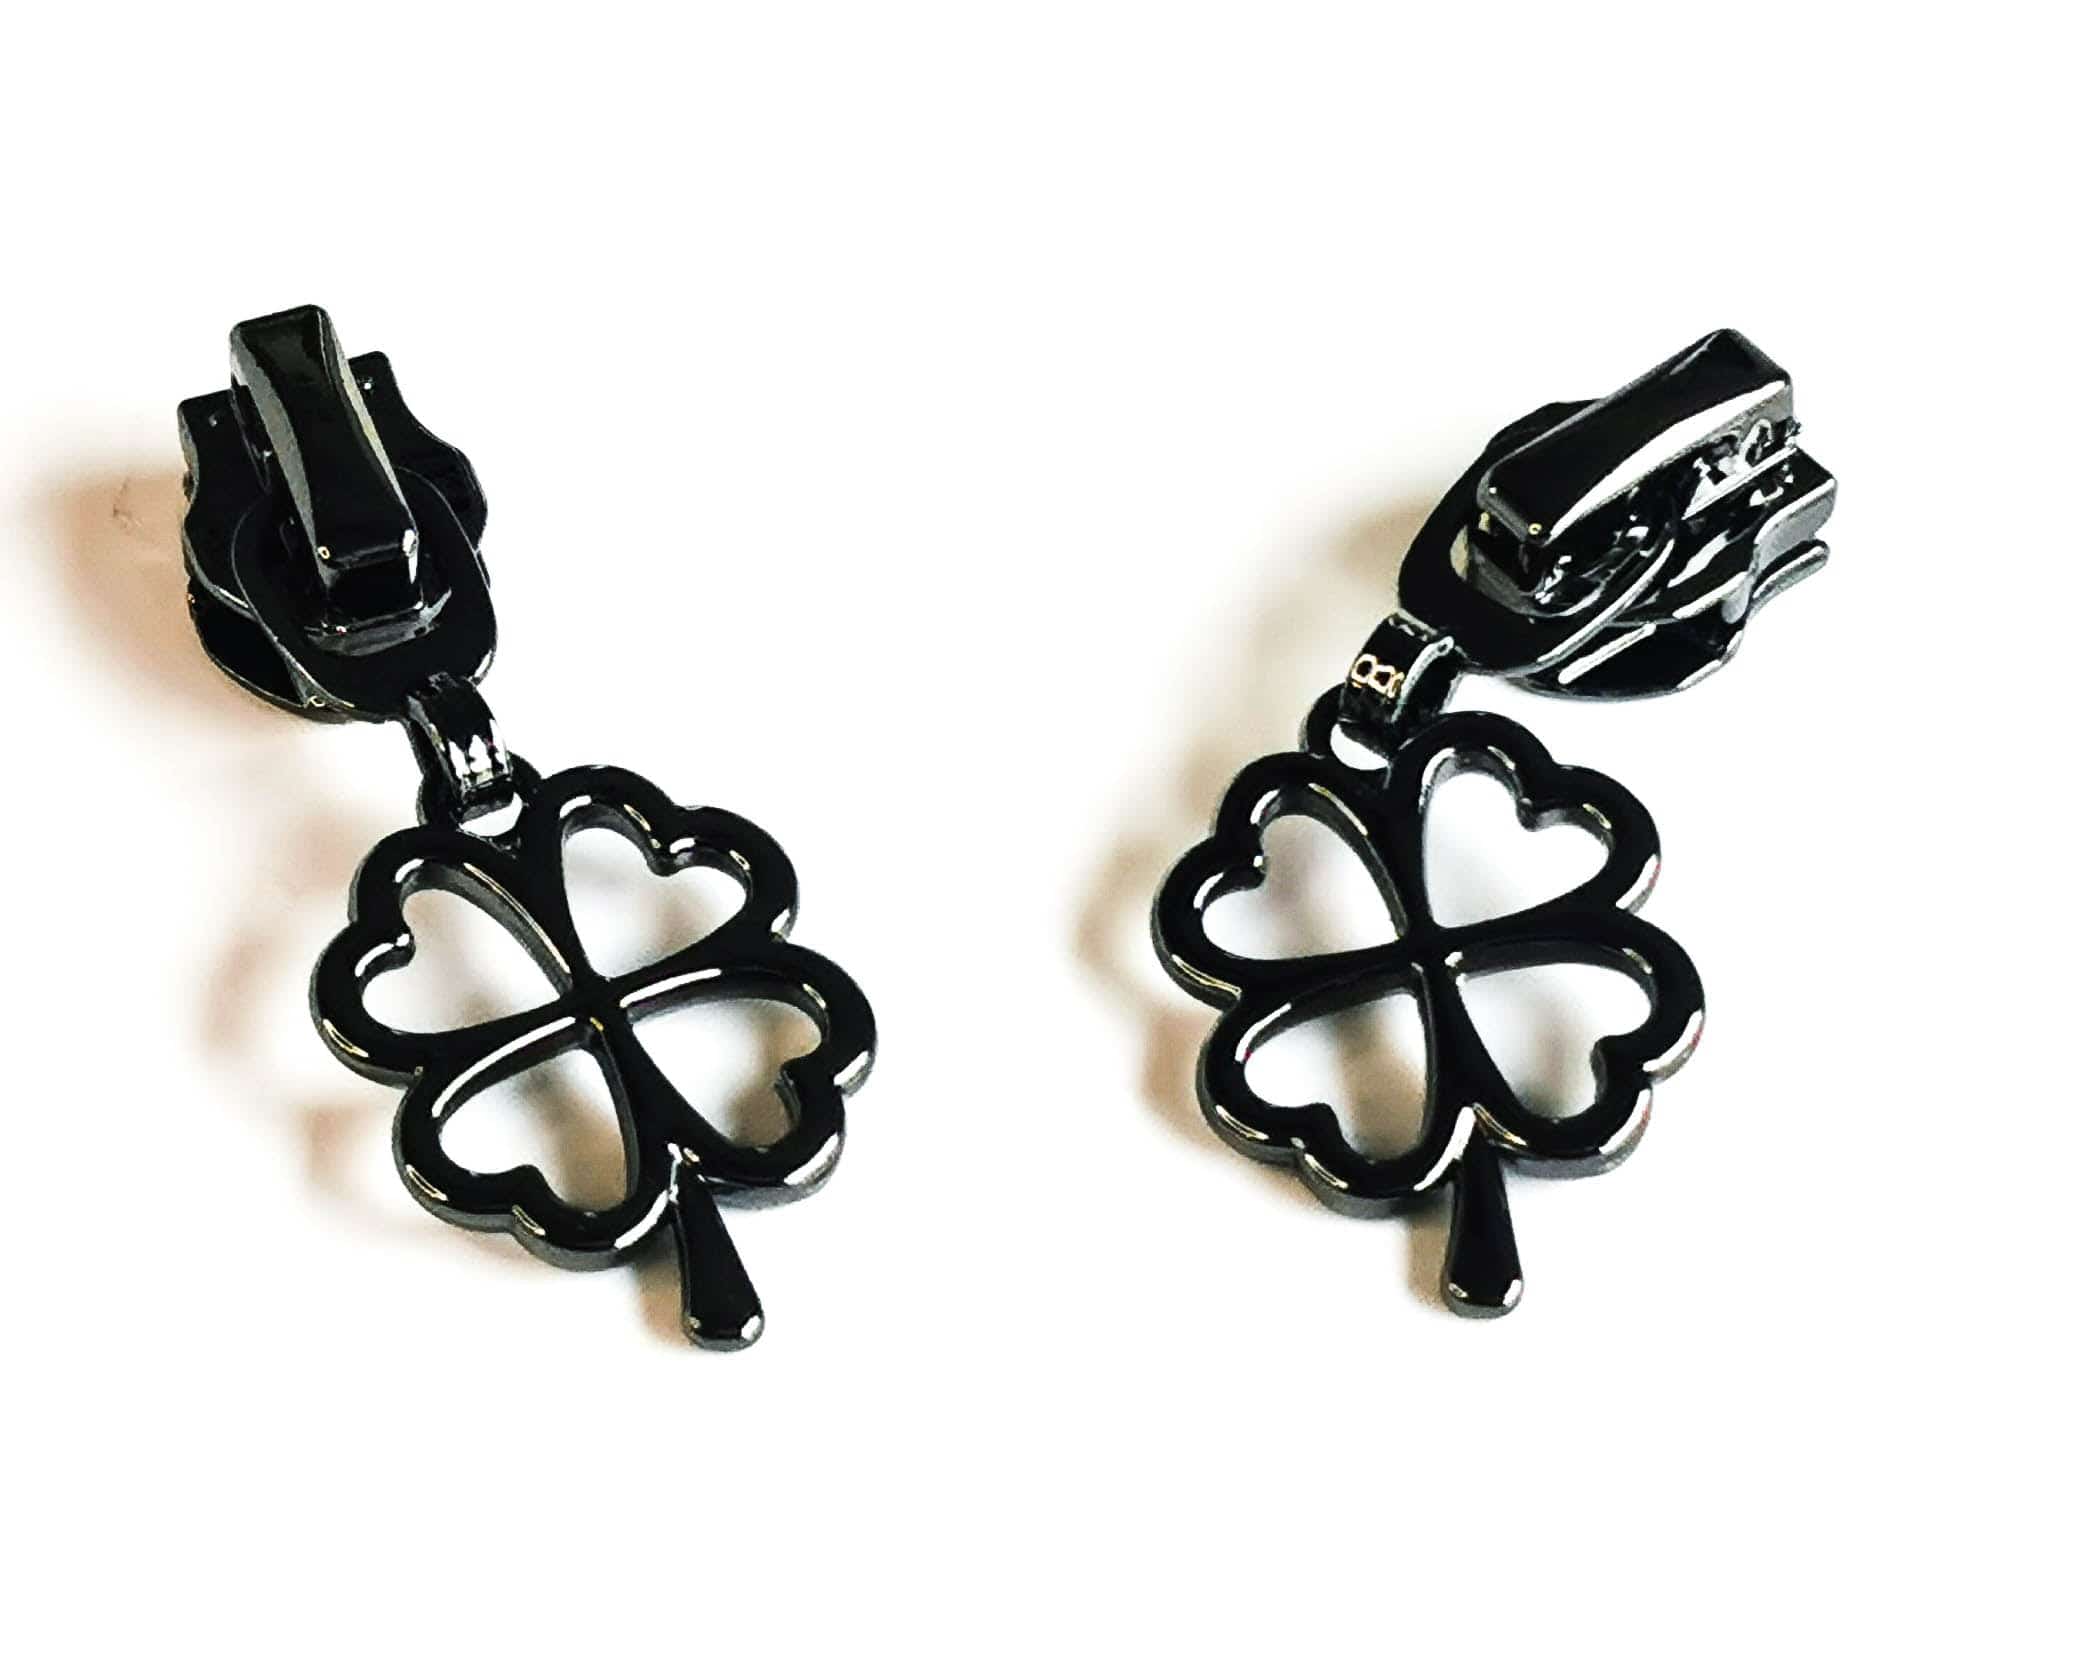 Fancy Zipper Pulls. Hearts and four Leaf Clover For #5 Metallic Nylon Coil Zipper tape Pack of Two. By Kiwi Bagineers - Kiwi Bagineers